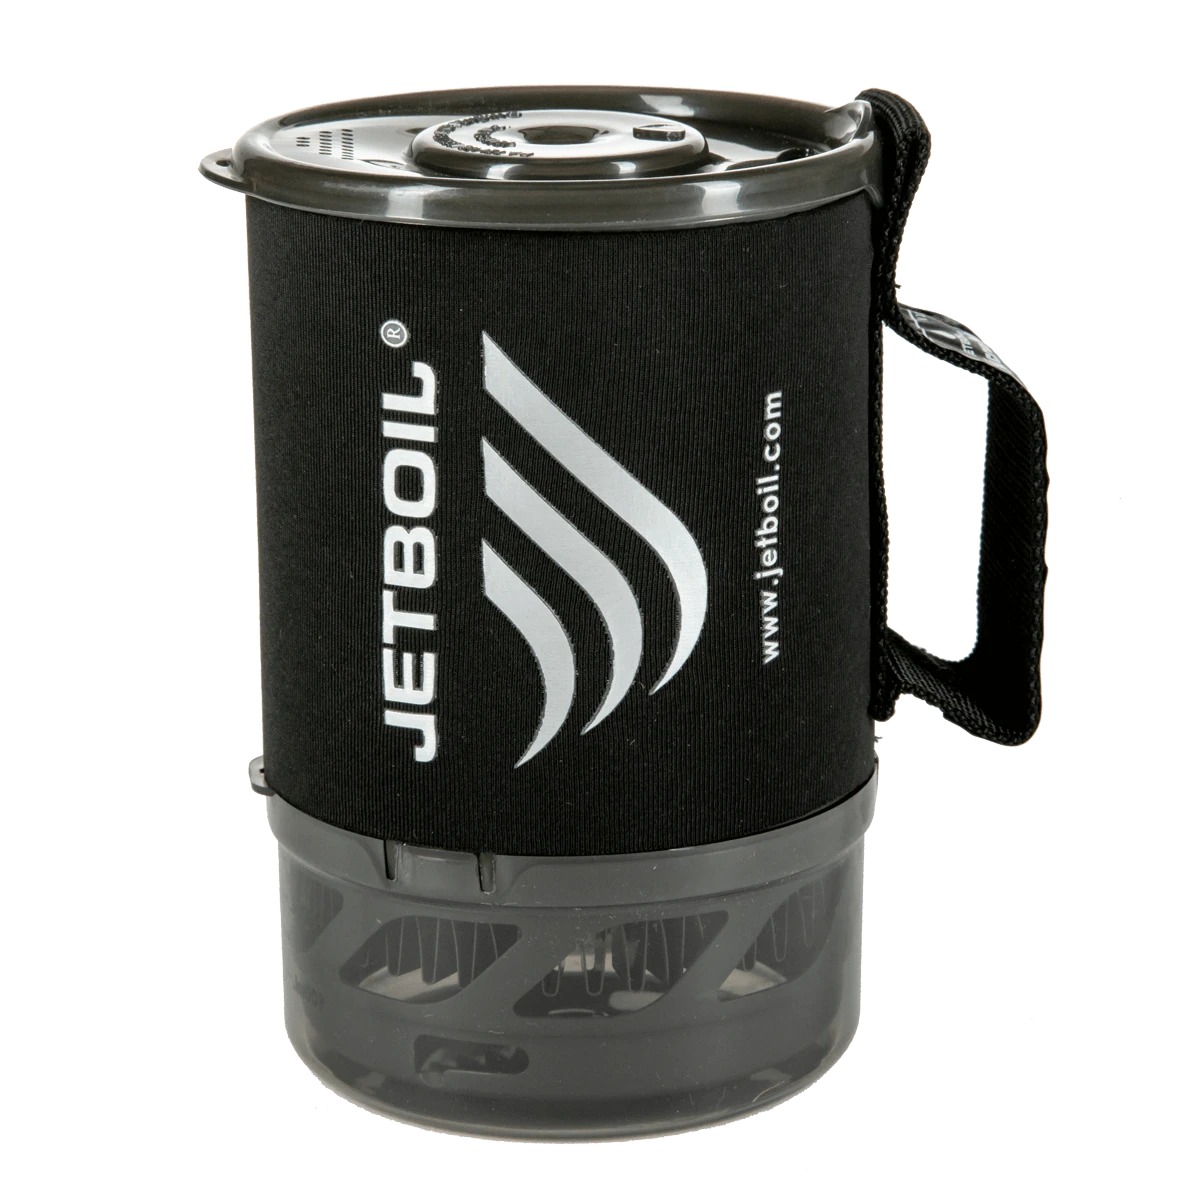 MicroMo Cooking System - Jetboil